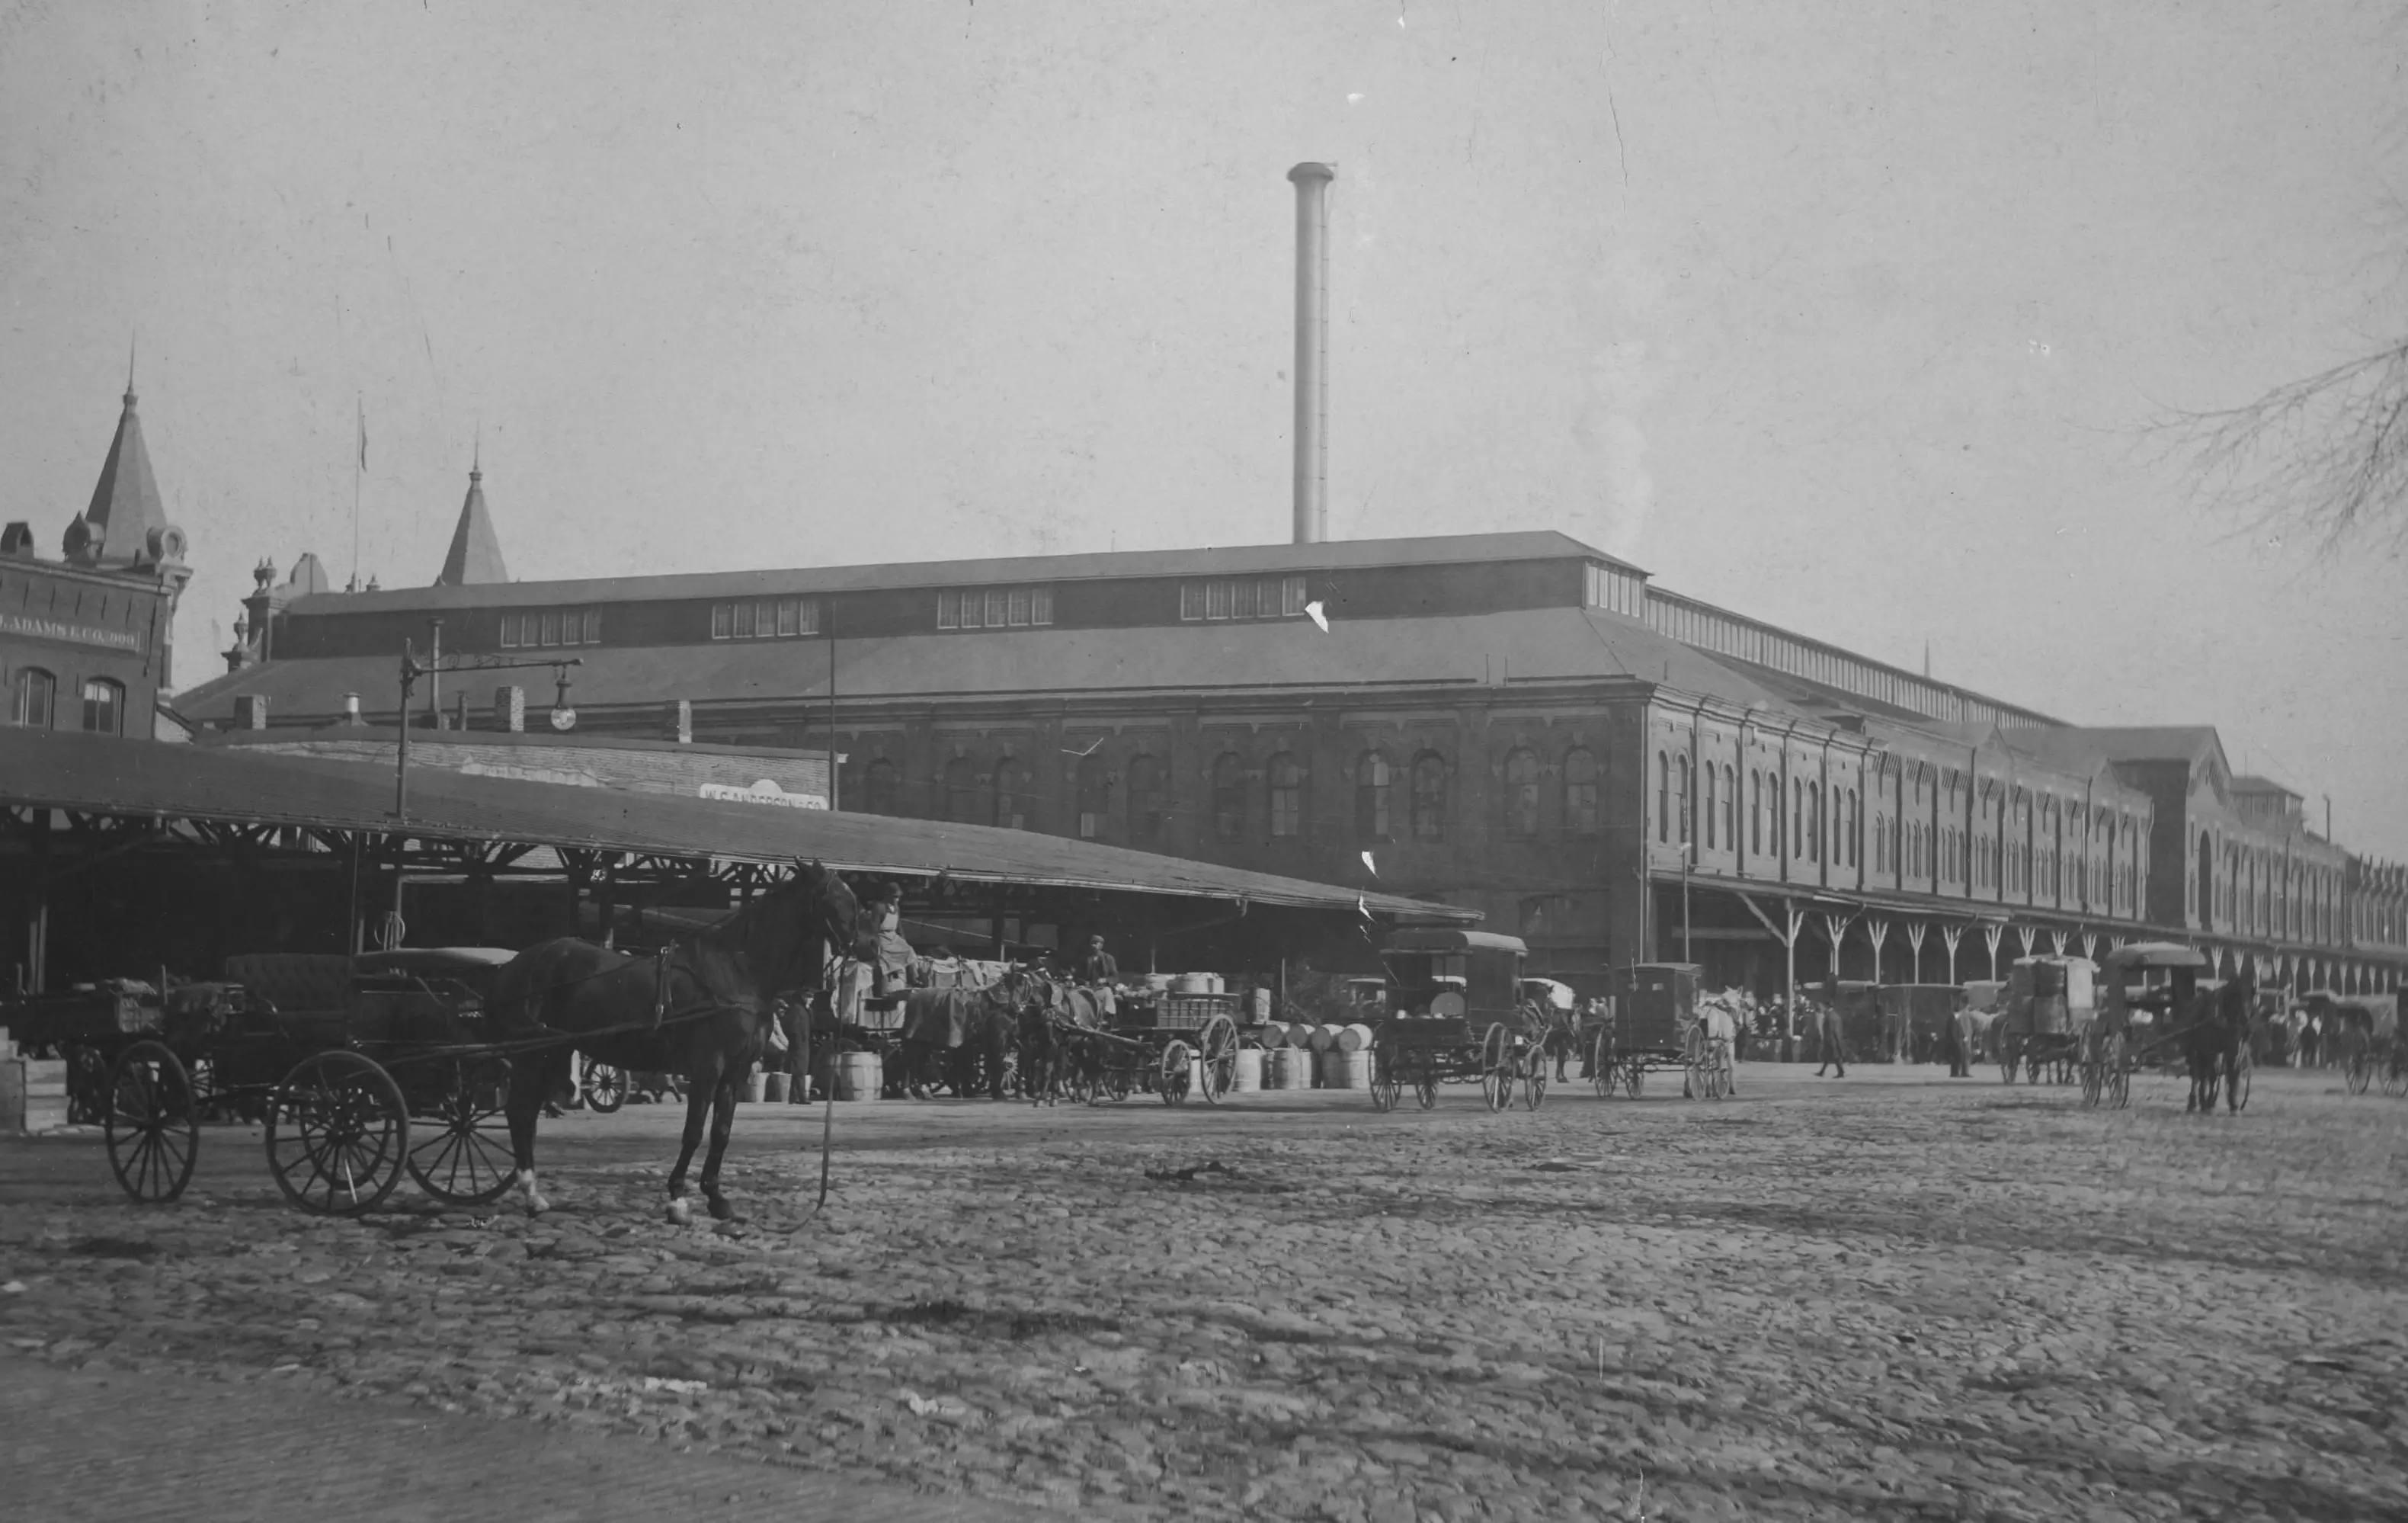 View of Constitution Avenue NW looking towards Center Market, which occupied the northeast corner of 9th Street NW. Many produce stalls are visible on the northwest corner of that intersection and horse-drawn vehicles are on the cobblestone street.